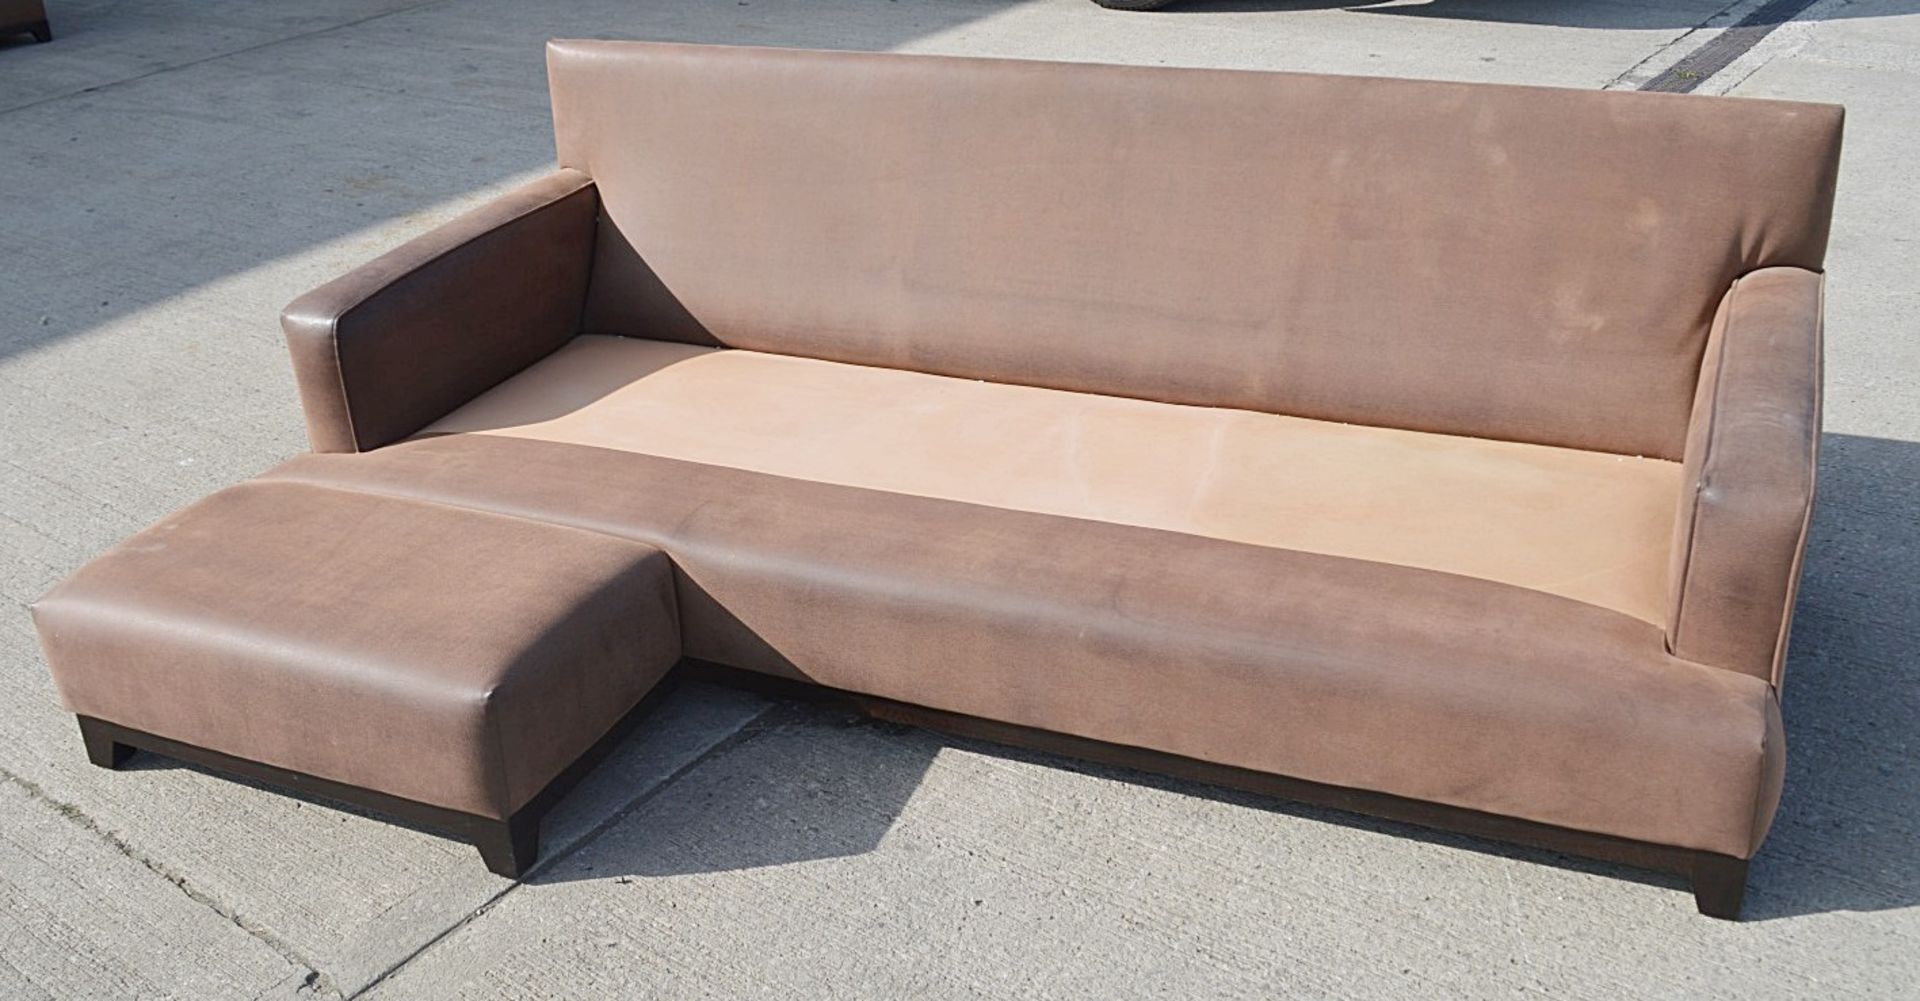 A Pair Of 2.5 Metre Wide Corner Sofas - Dimensions: W250 x D155 x D90cm / Seat Height 47cm - - Image 21 of 21